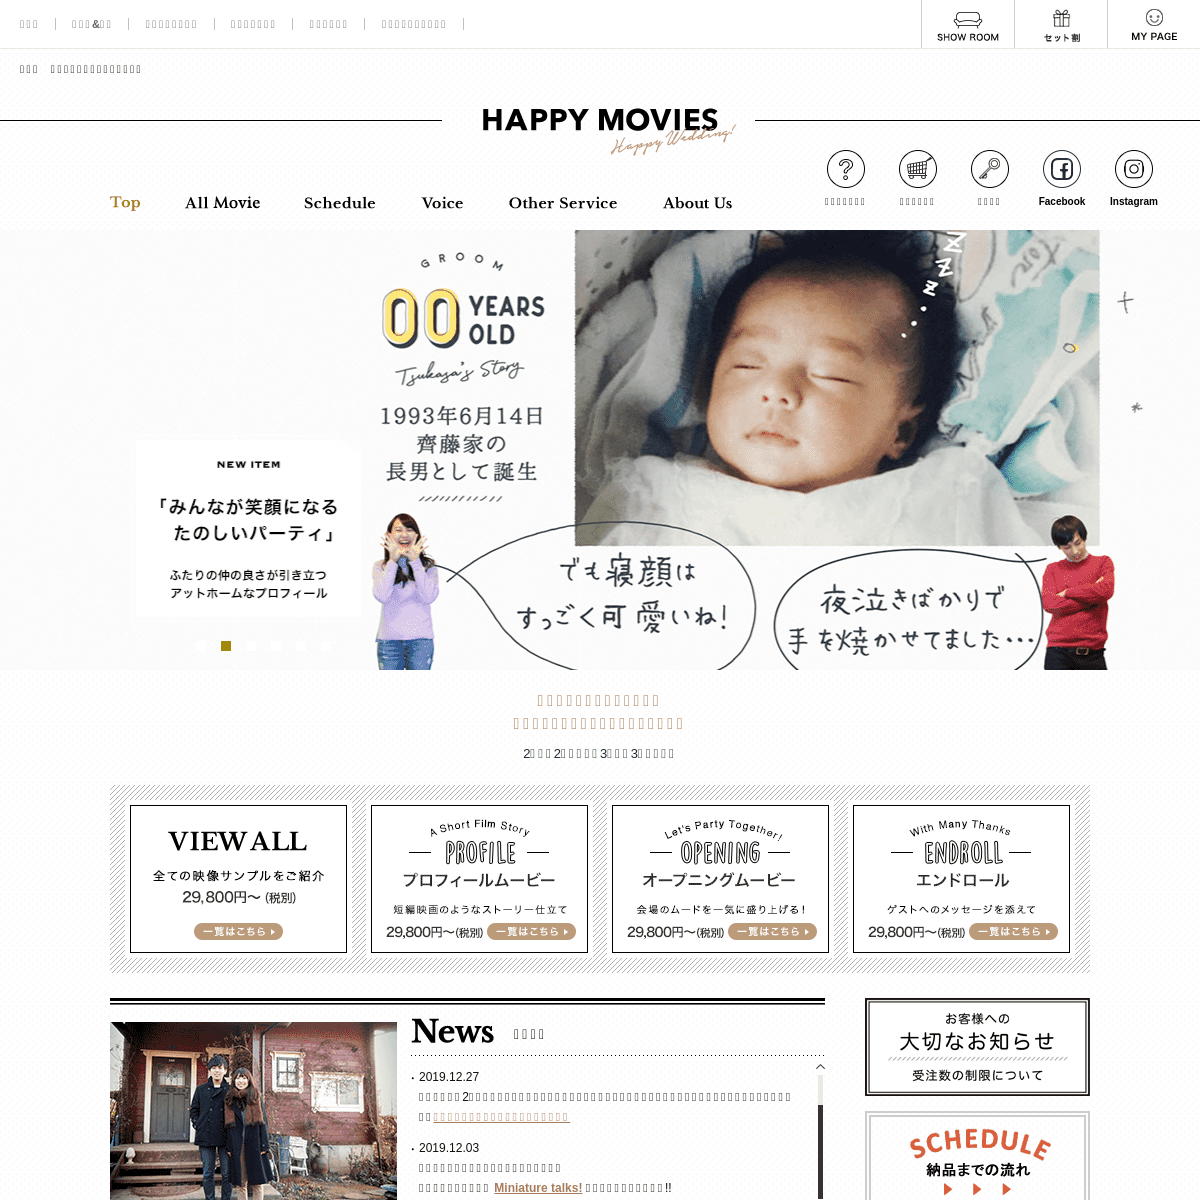 A complete backup of happymovies.jp